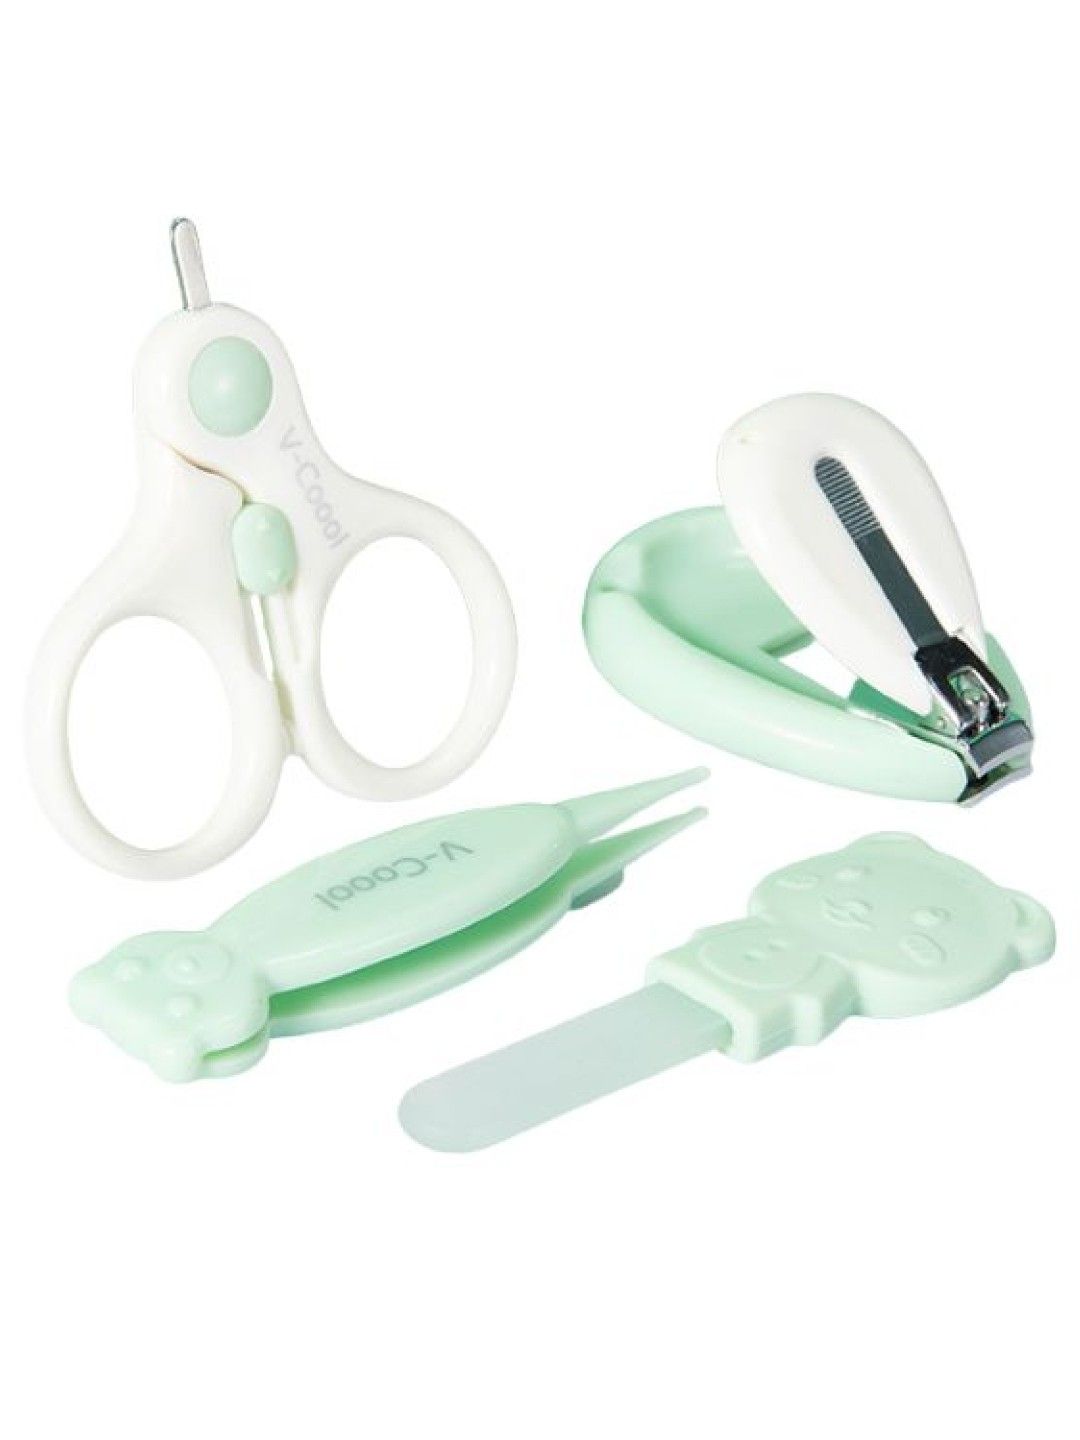 V-coool 4-in-1 Baby Nail Grooming Kit with Case